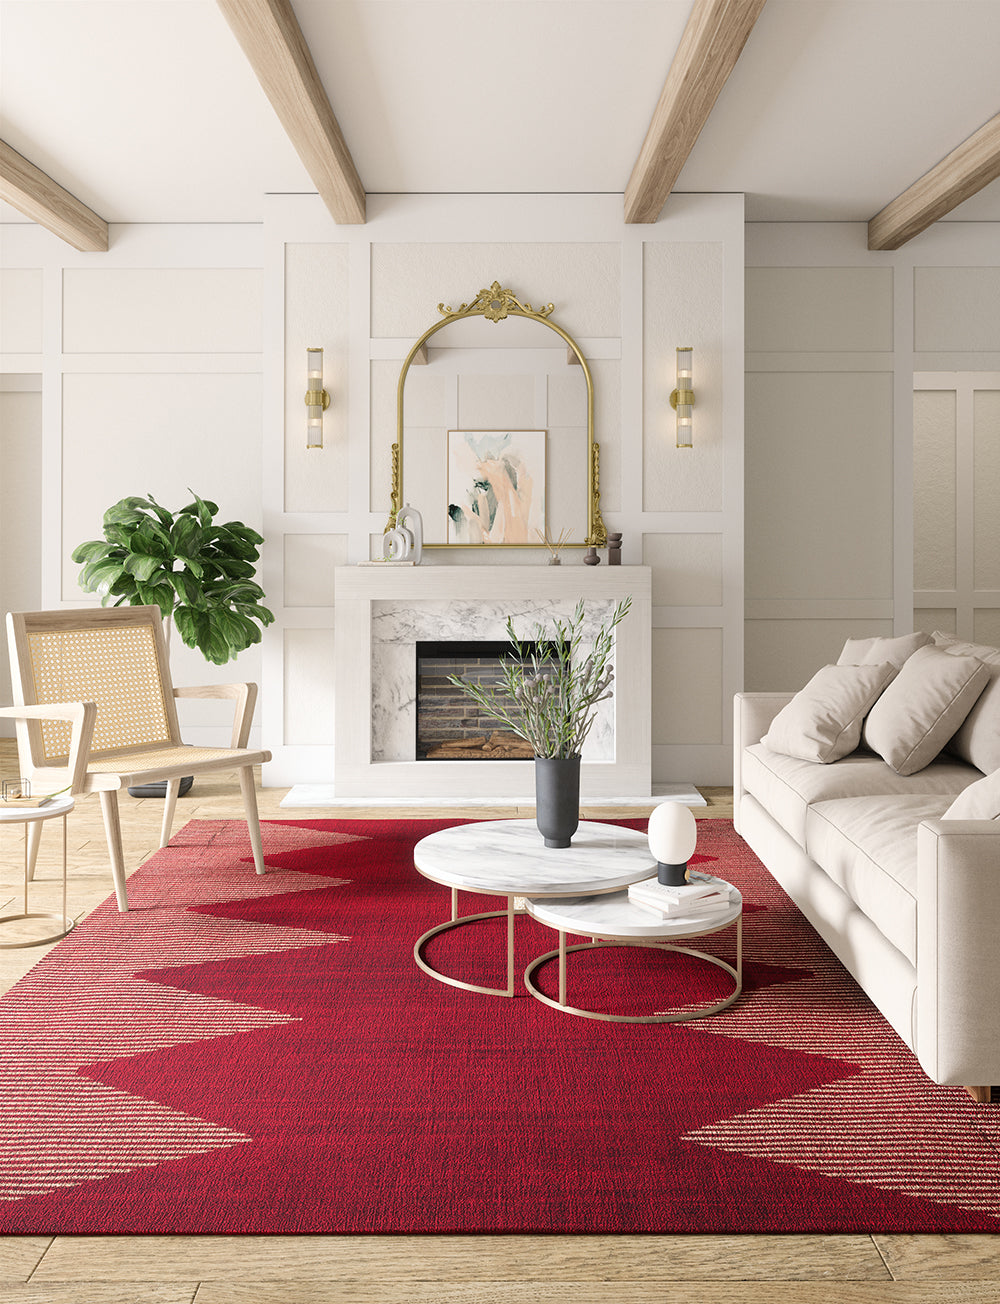 Zona Red Rug